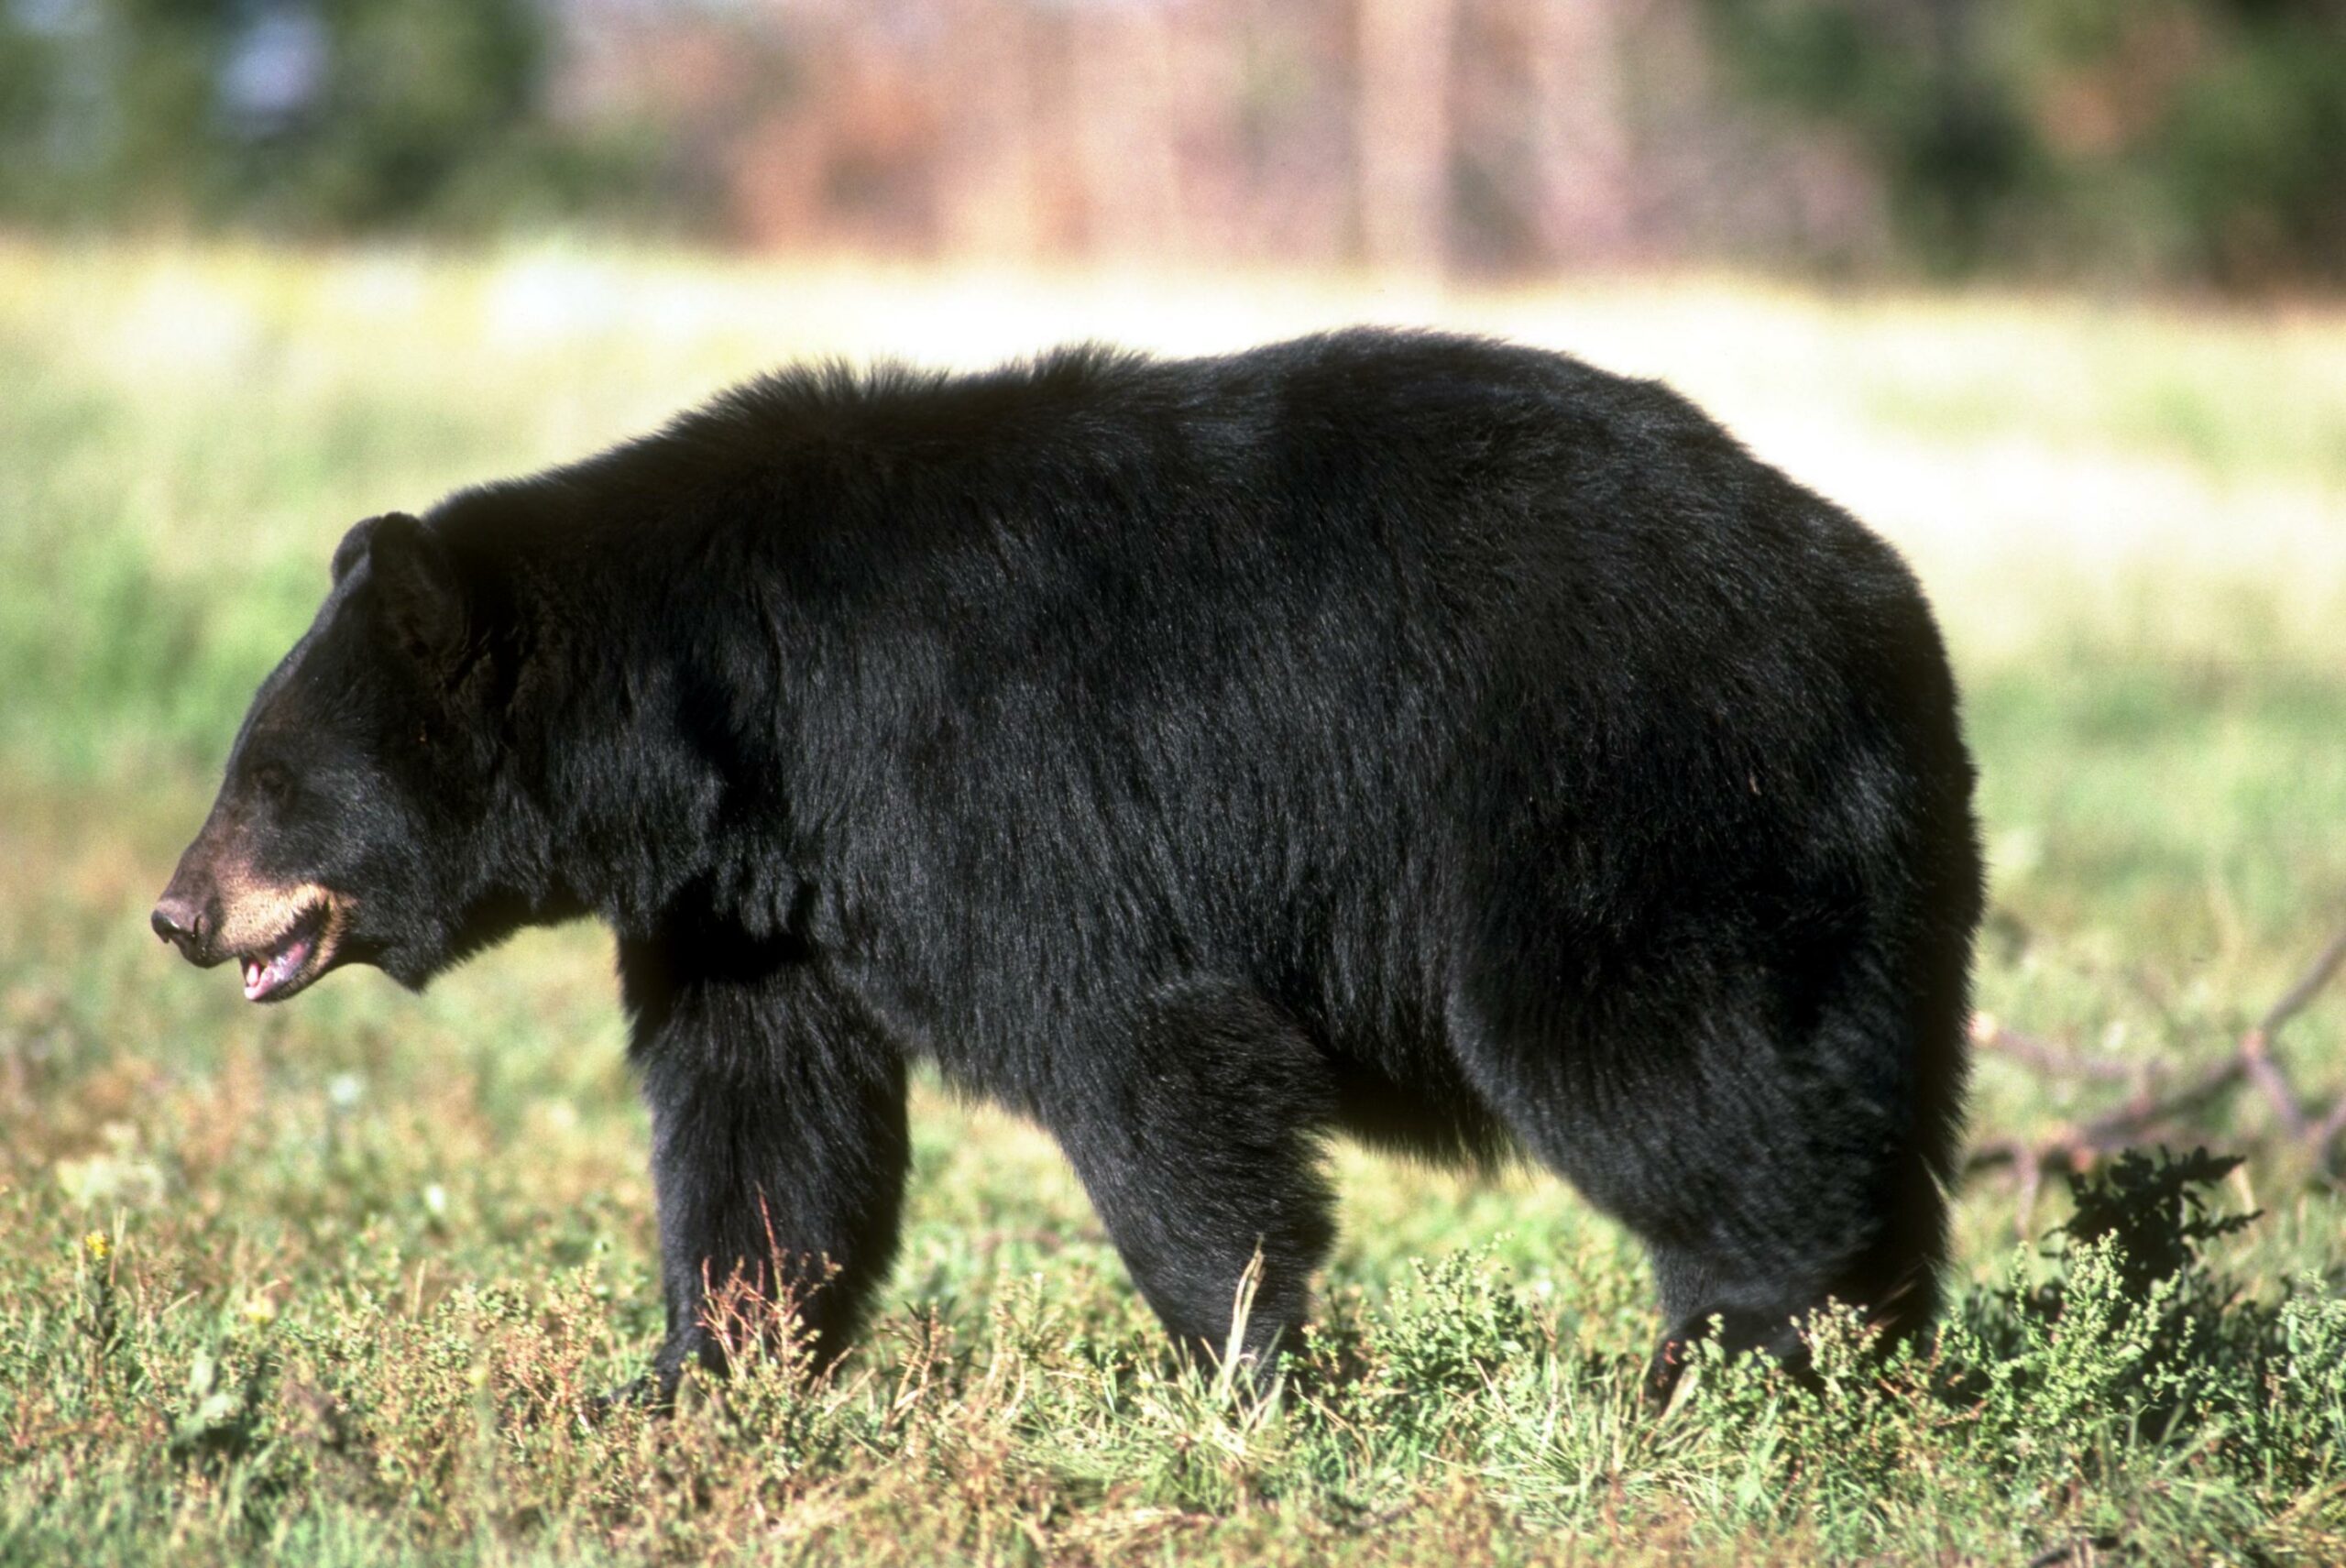 A black bear walks across a meadow in California, where a bear hunting ban has been proposed.